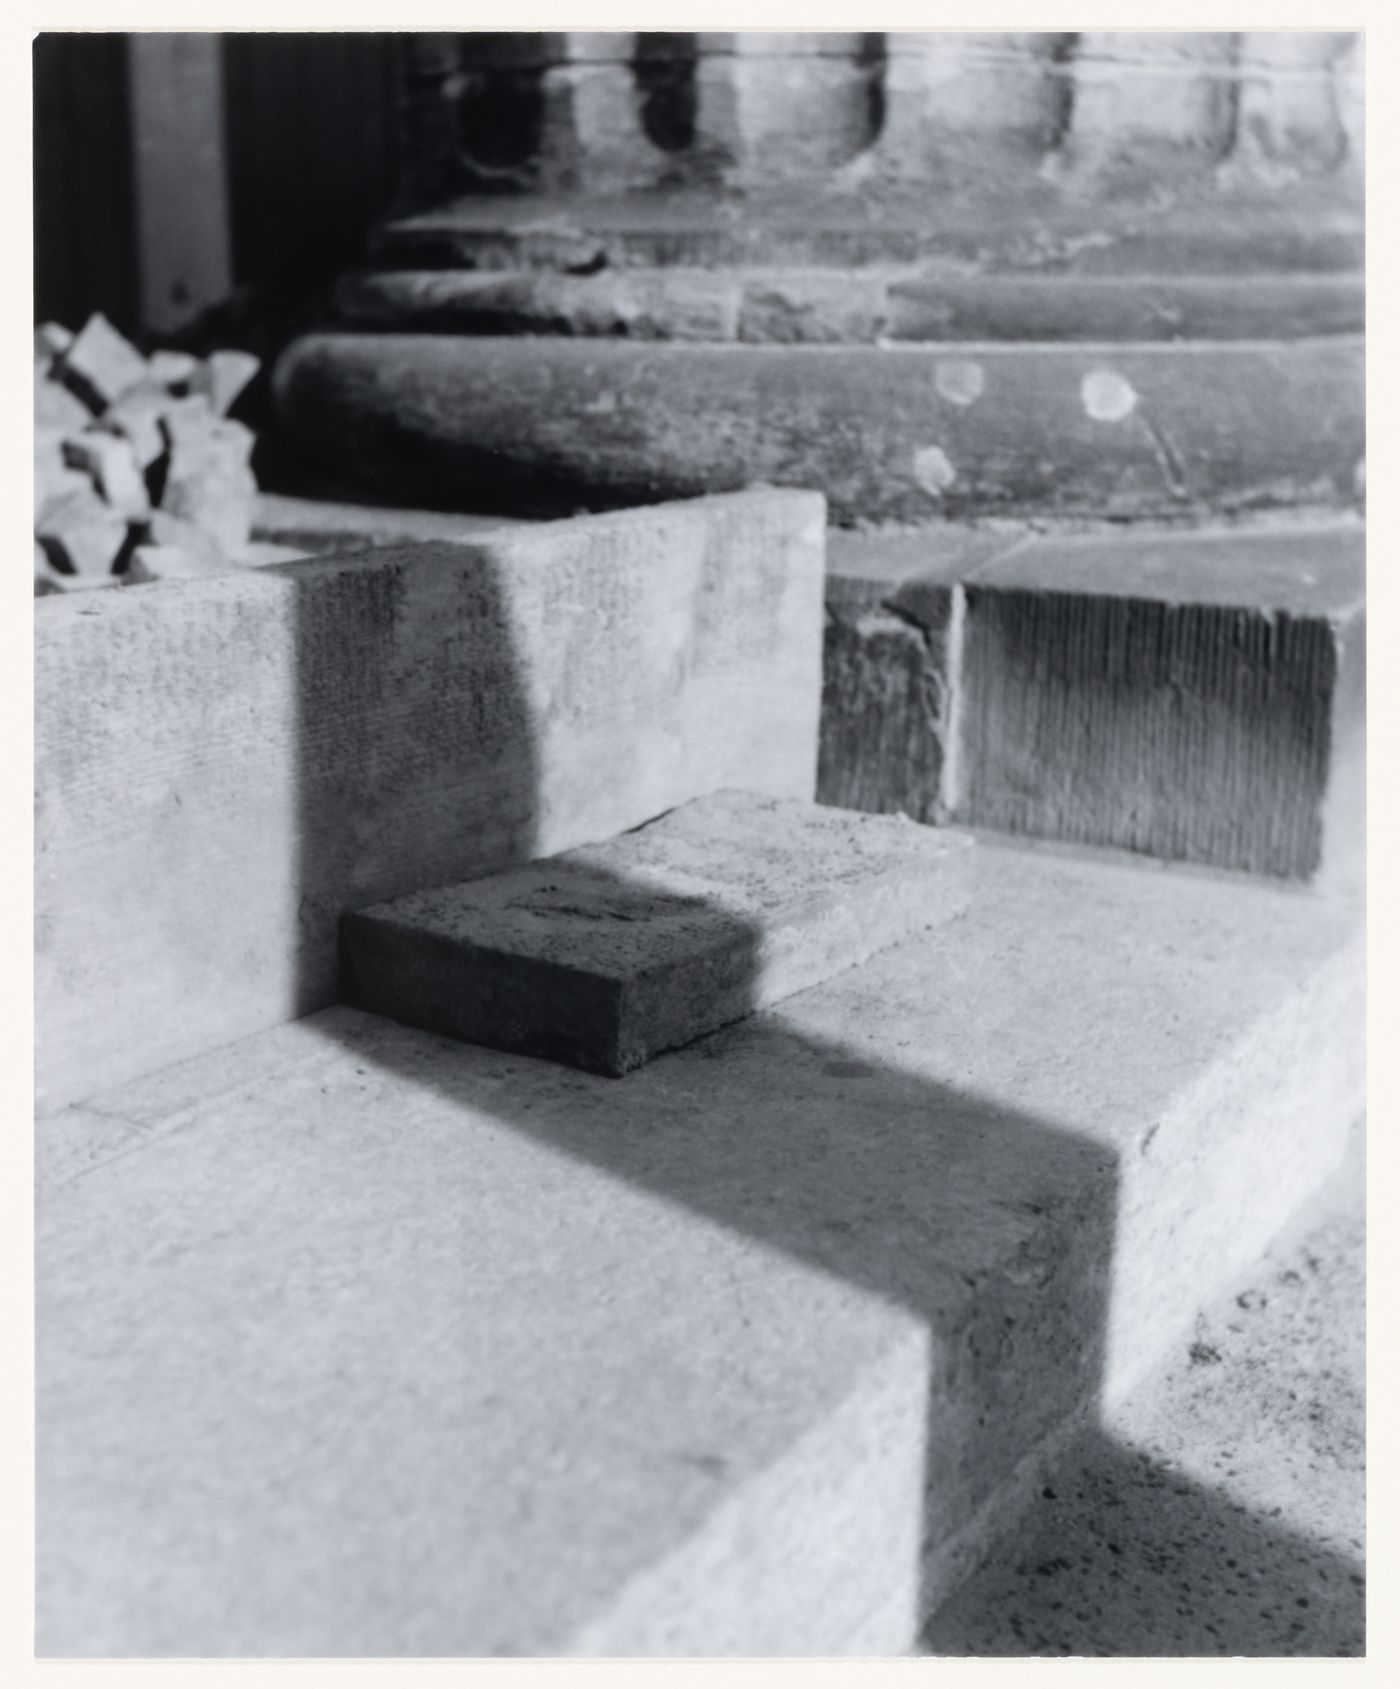 View of stones, building materials, a step, the base of a column and a cast shadow, Berlin, Germany, from the artist book "The Potsdamer Project"